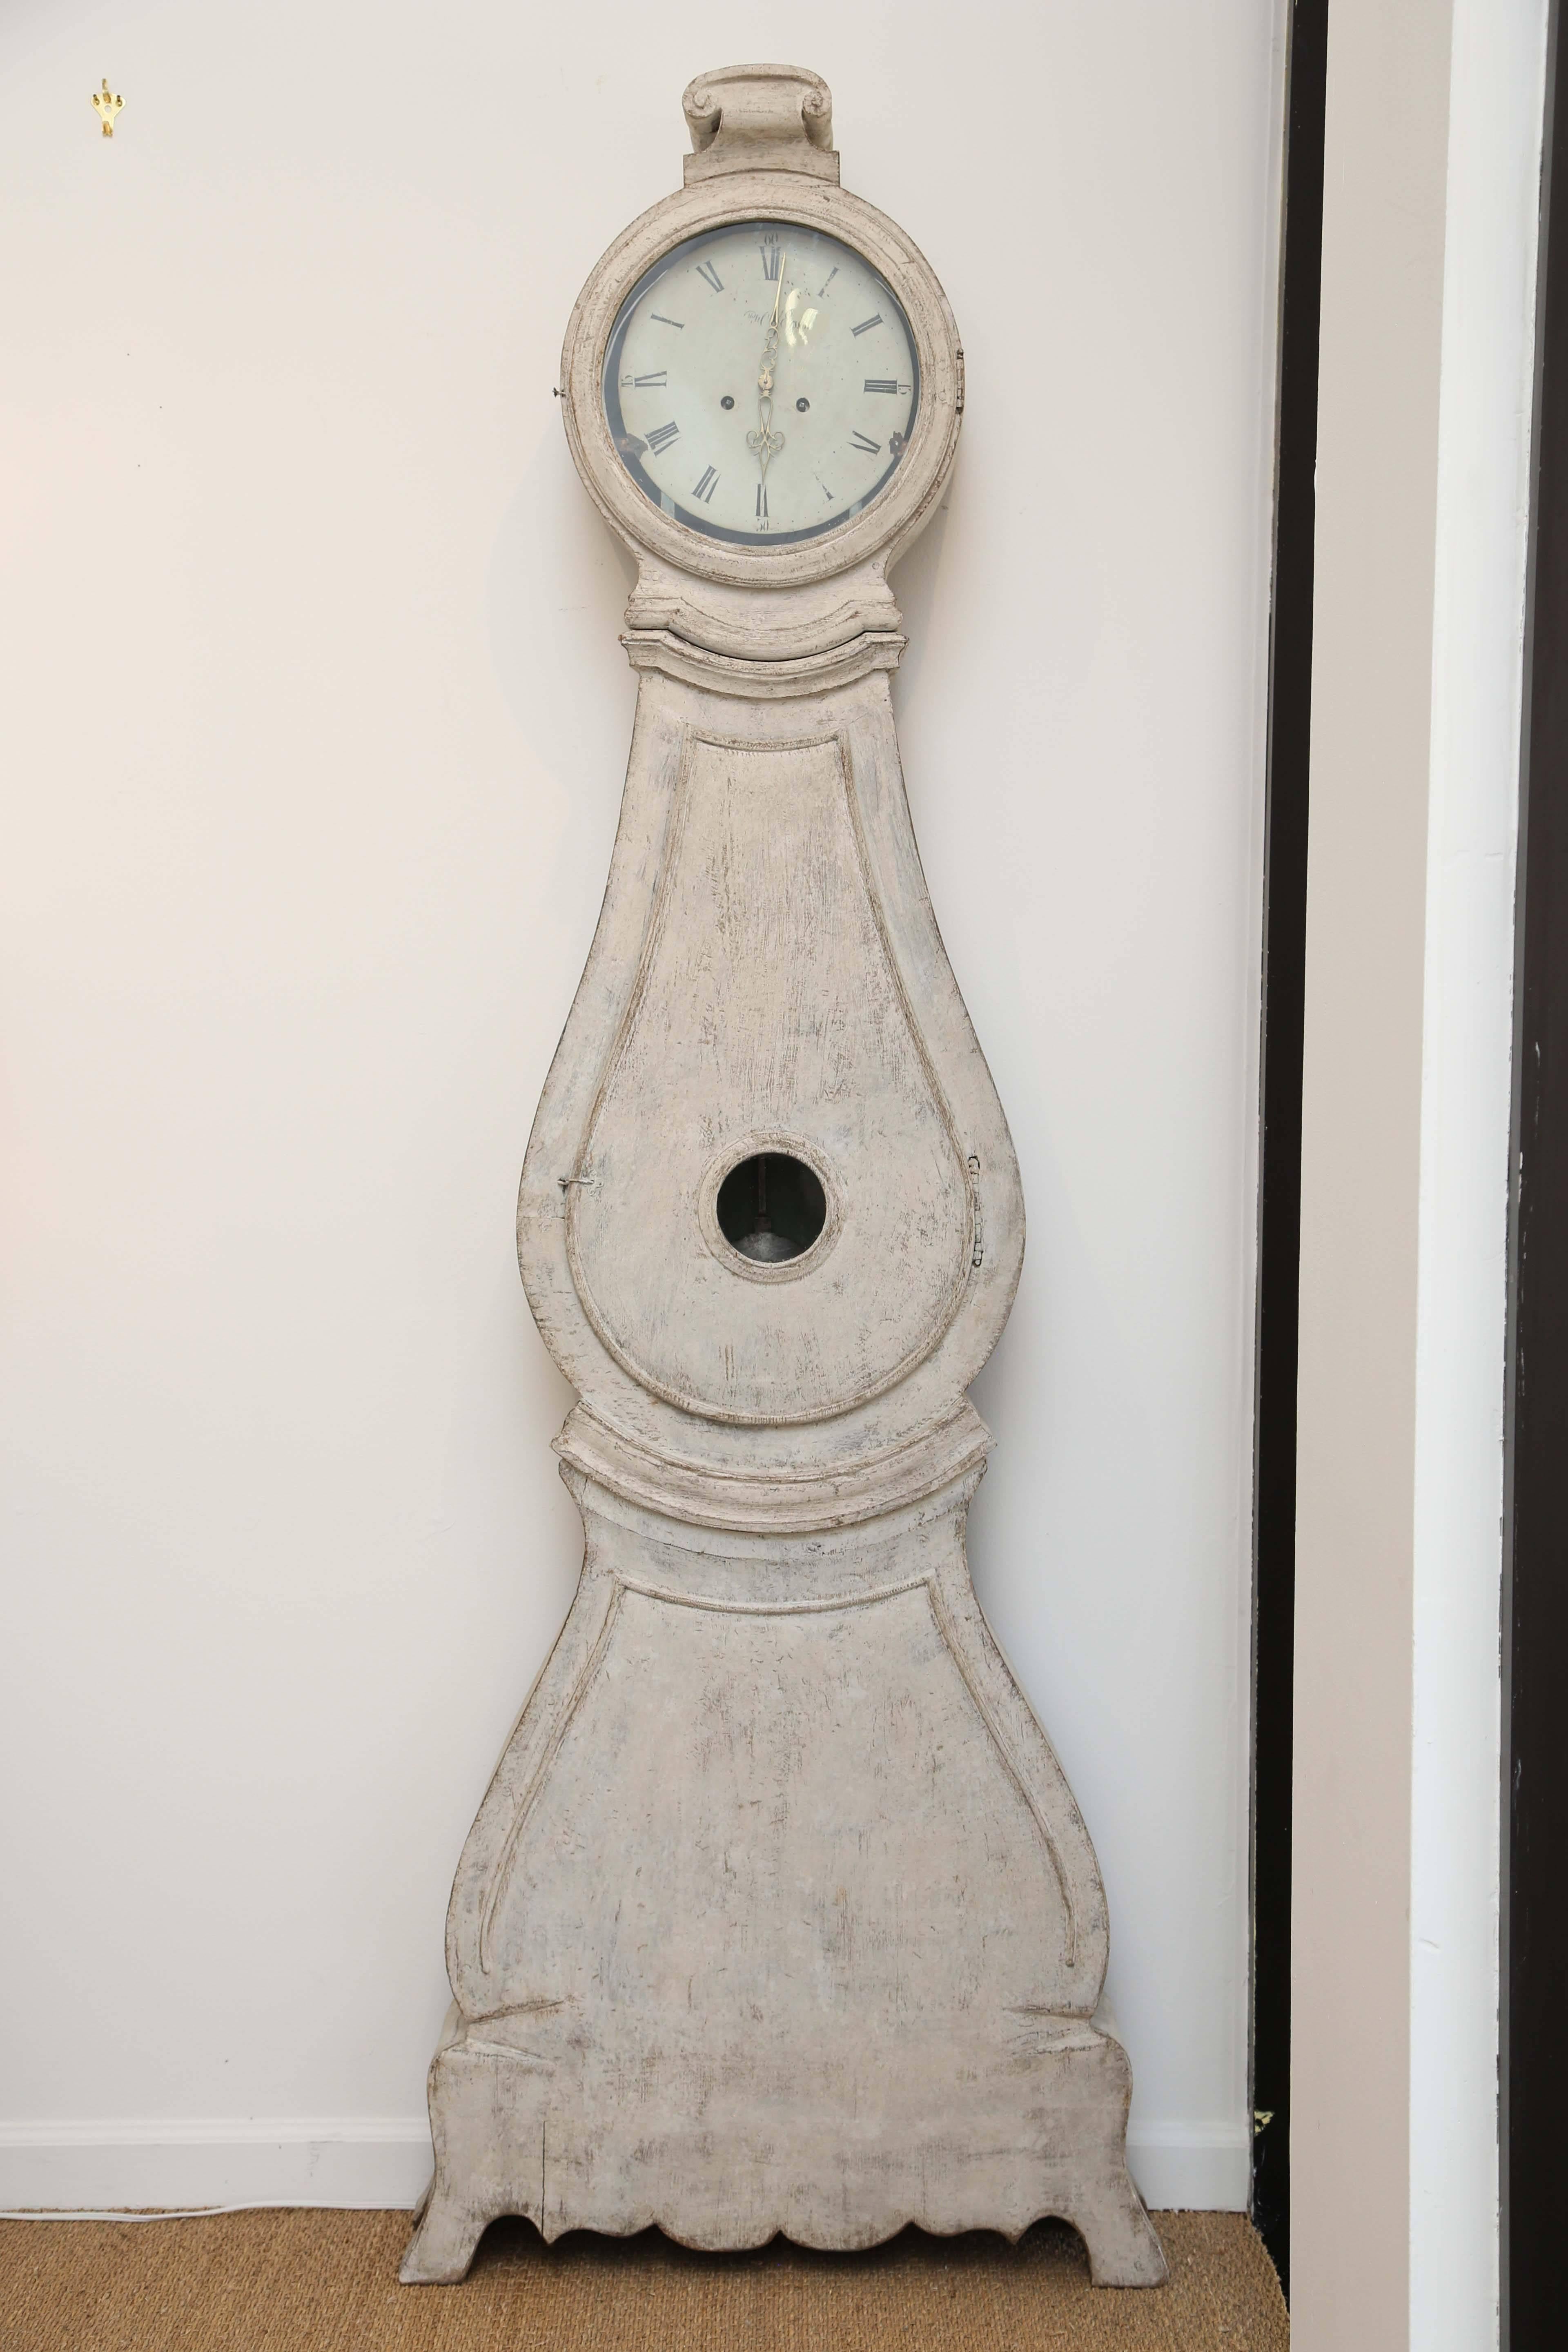 18th Century Antique Swedish Painted Tall Case Mora Clock
Lovely carved shaped bonnet top, graceful serpentine shape, glass circle
in door to see the pendulum, clock has been cleaned and is in working condition
the distressed paint finish has been